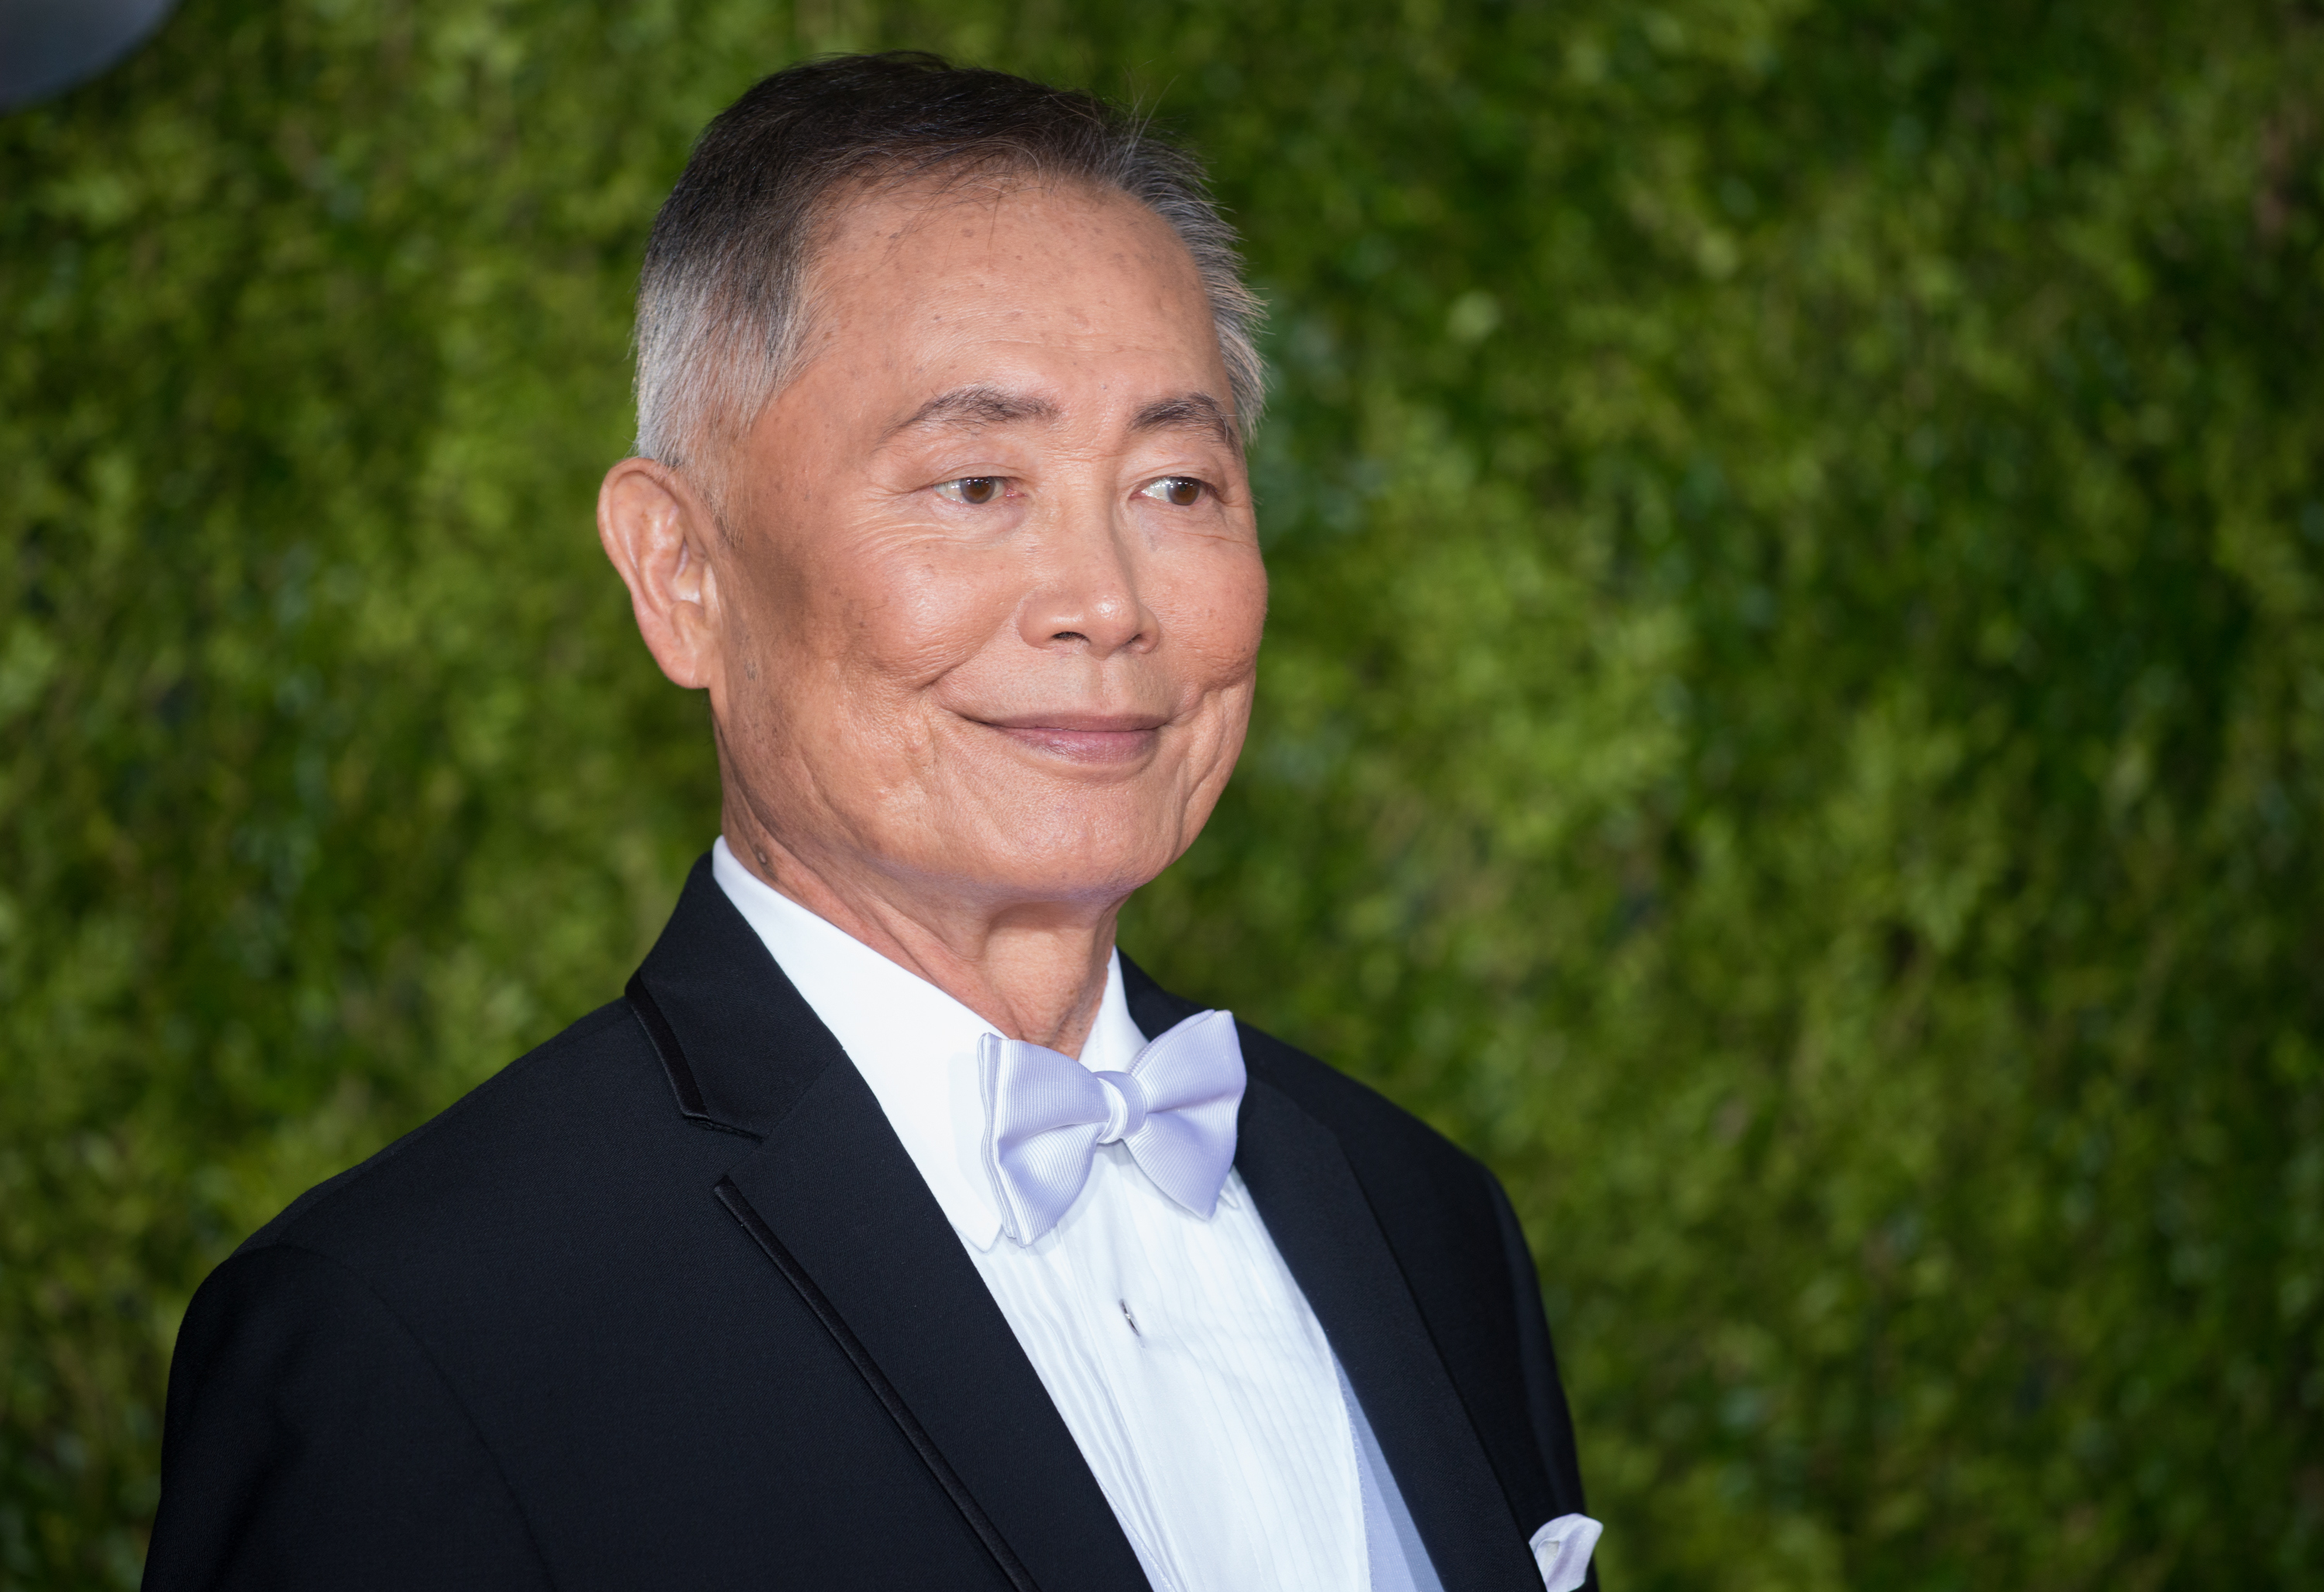 George Takei at the Tony Awards on June 7, 2015 in New York (Mark Sagliocco—Getty Images)